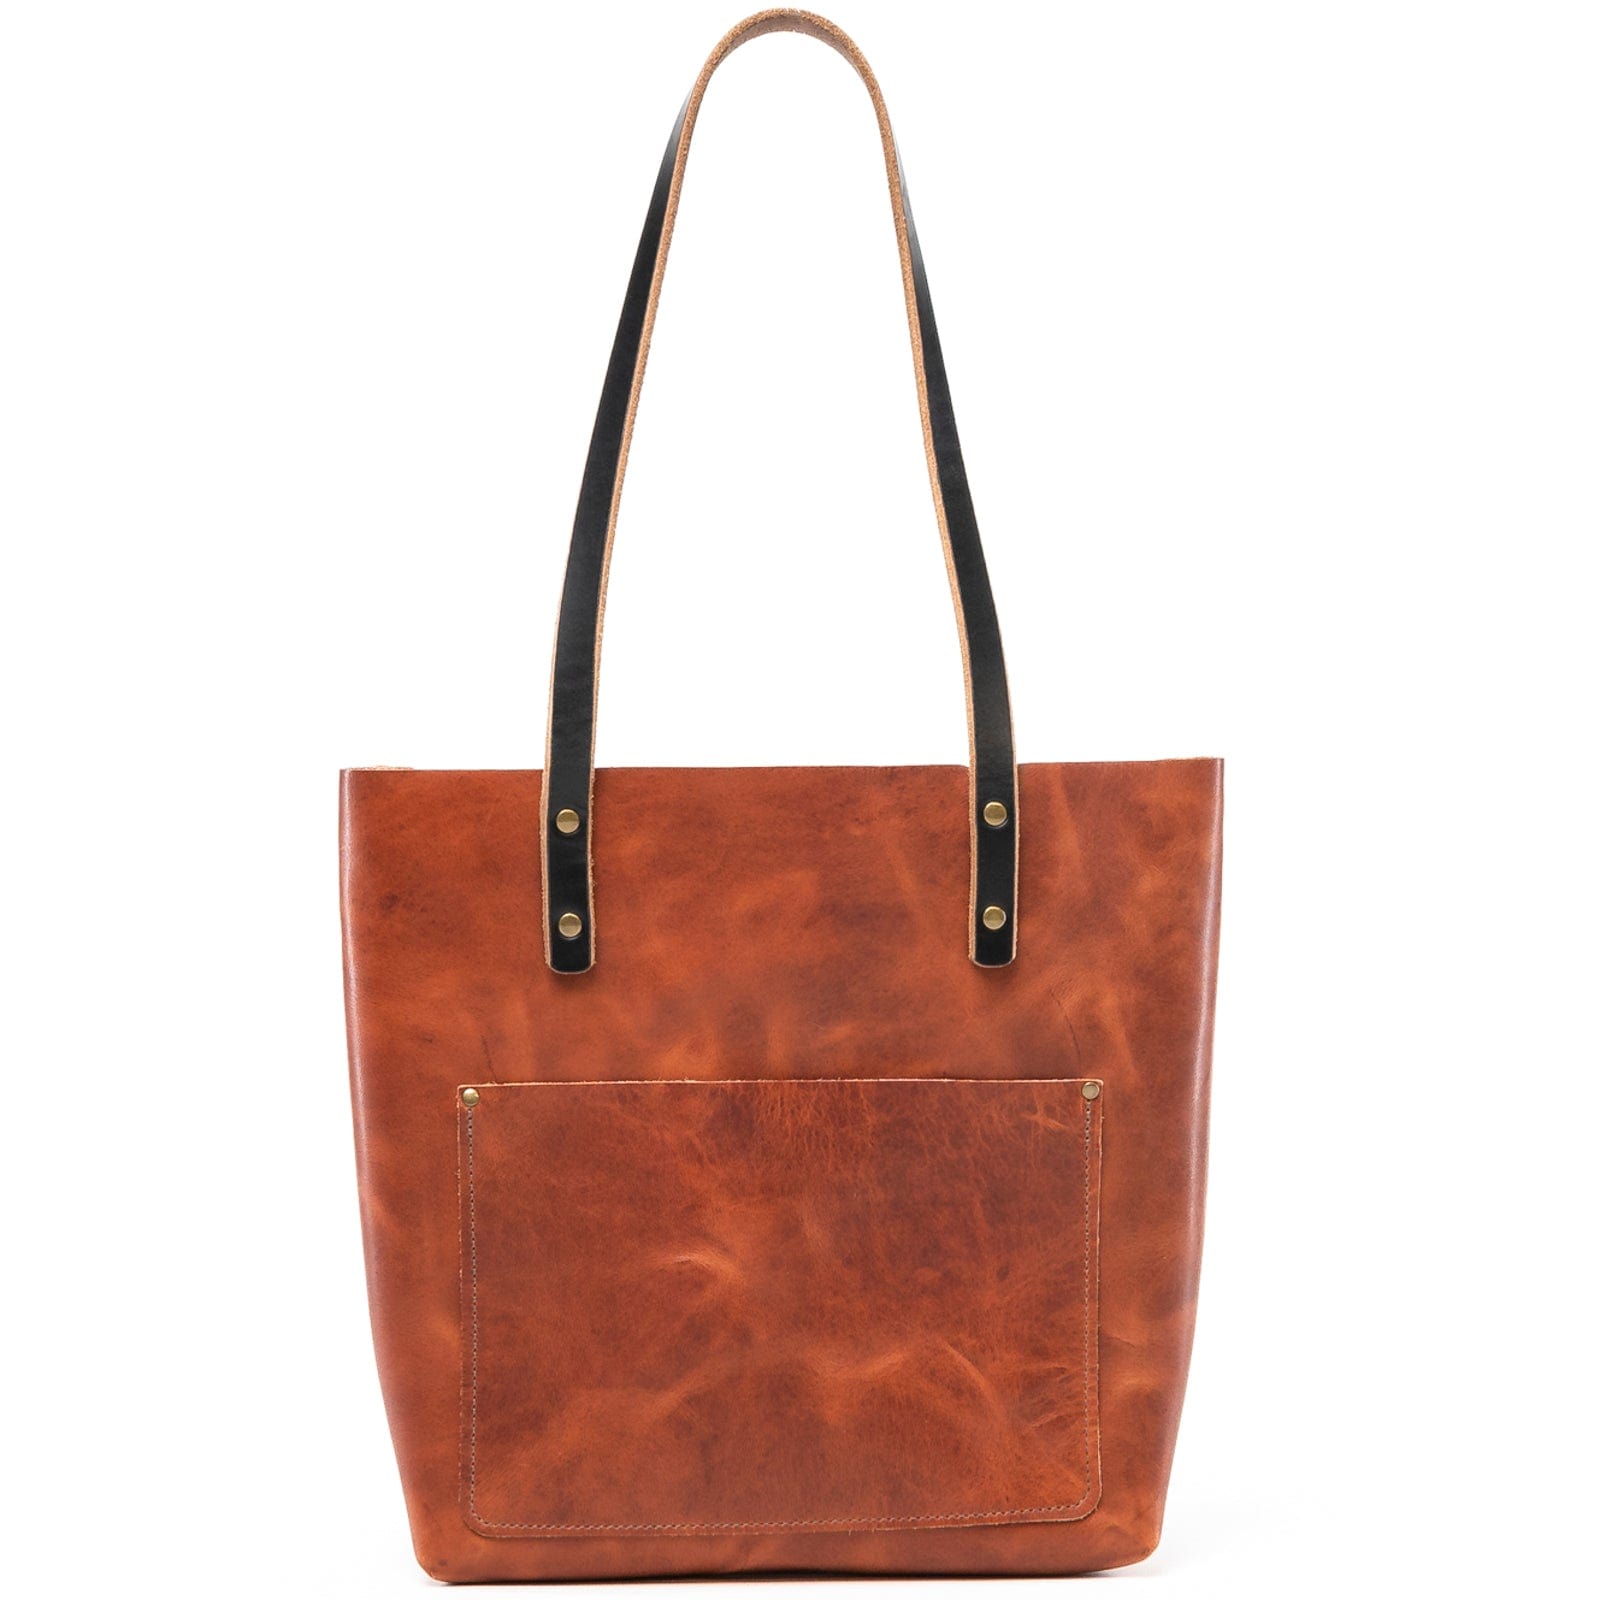 Leather Weekender Tote - English Tan Popov Leather